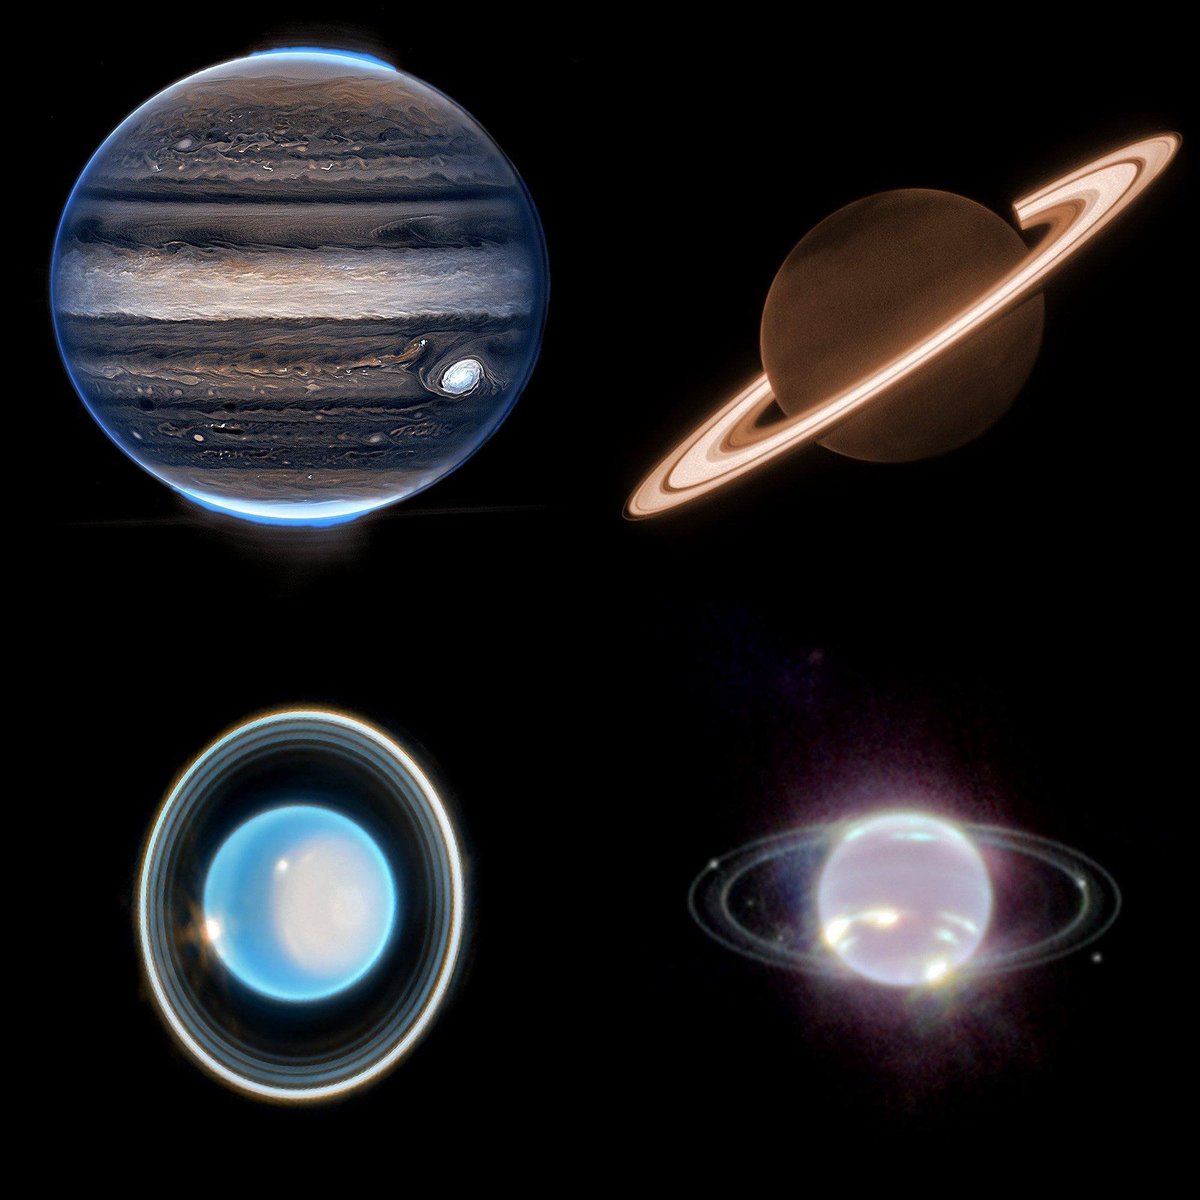 All four gas giants captured by the James Webb Space Telescope